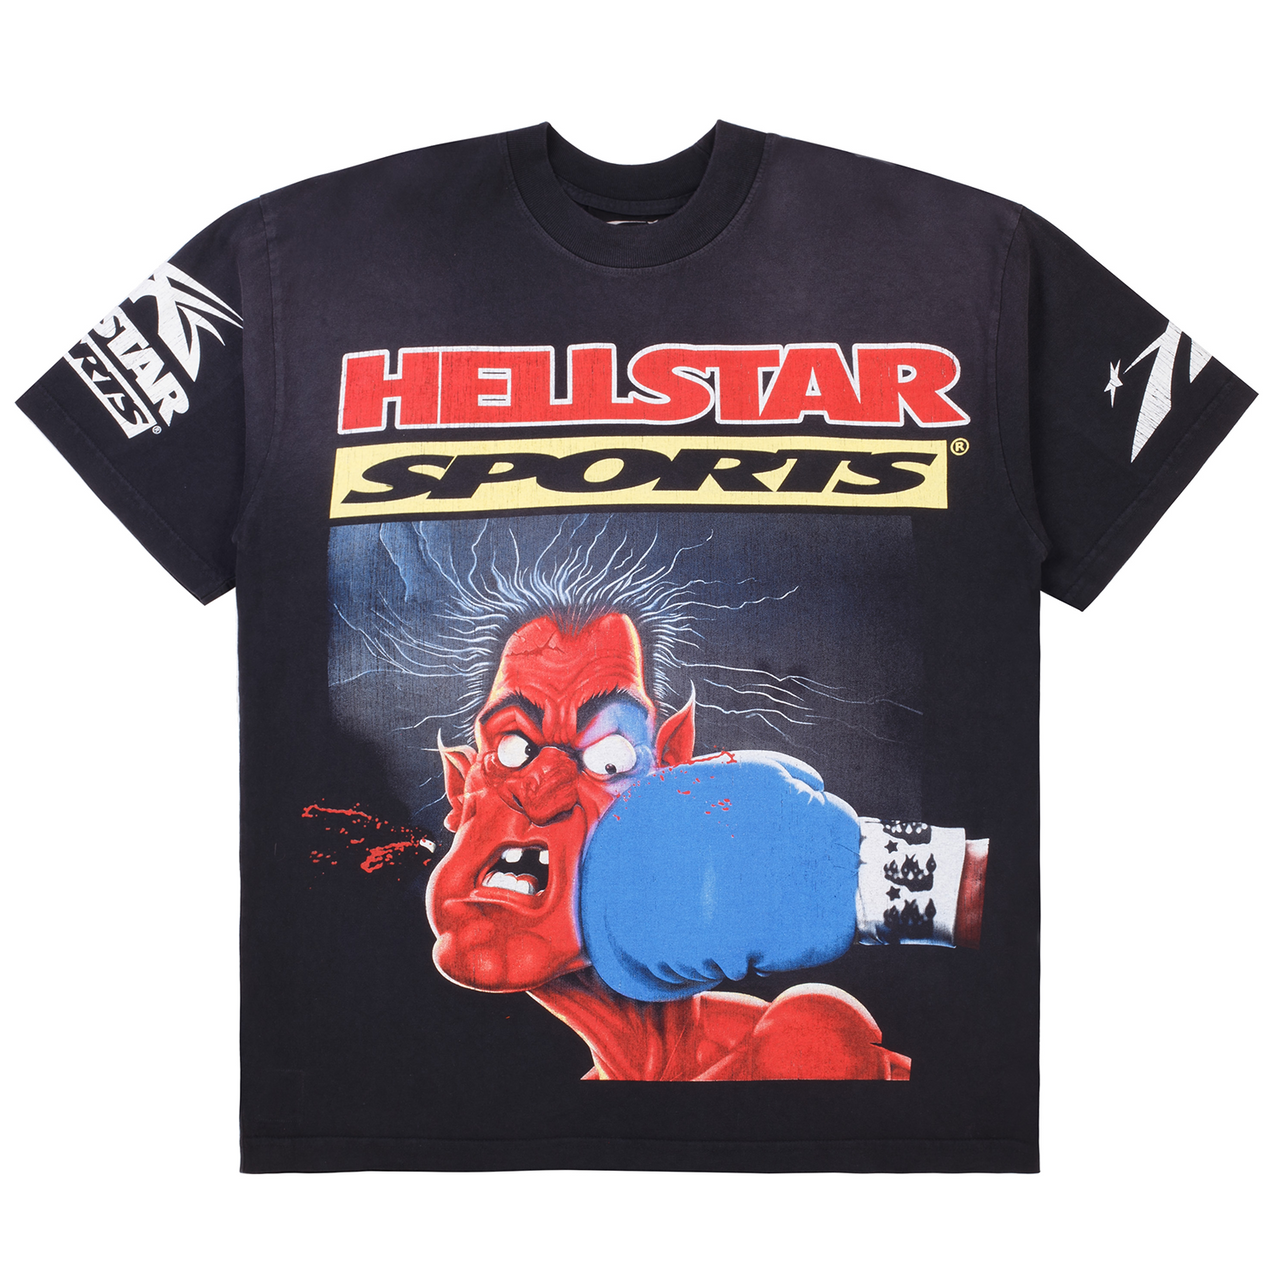 Hellstar Knock Out Tee Washed Black